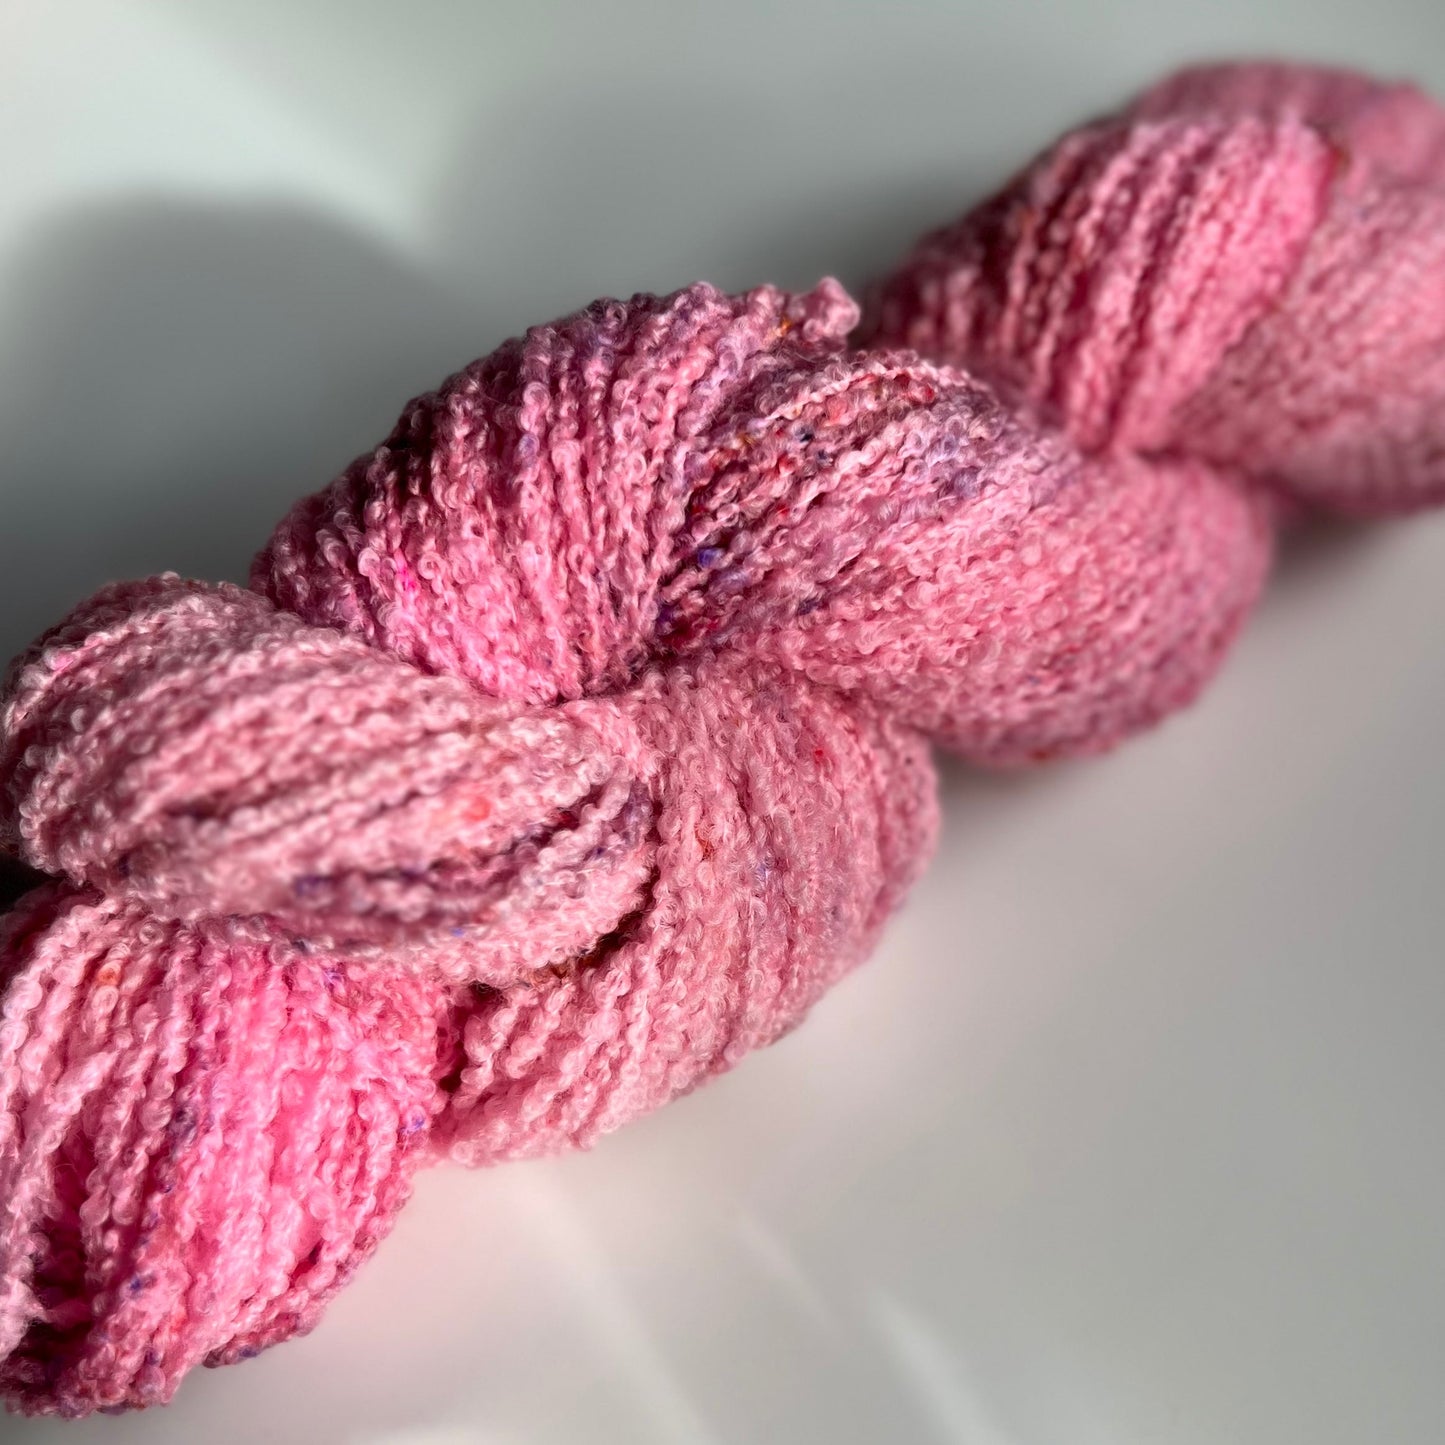 Load image into Gallery viewer, Summer Camp Fibers Hand Dyed Boucle DK - Bunny Slope
